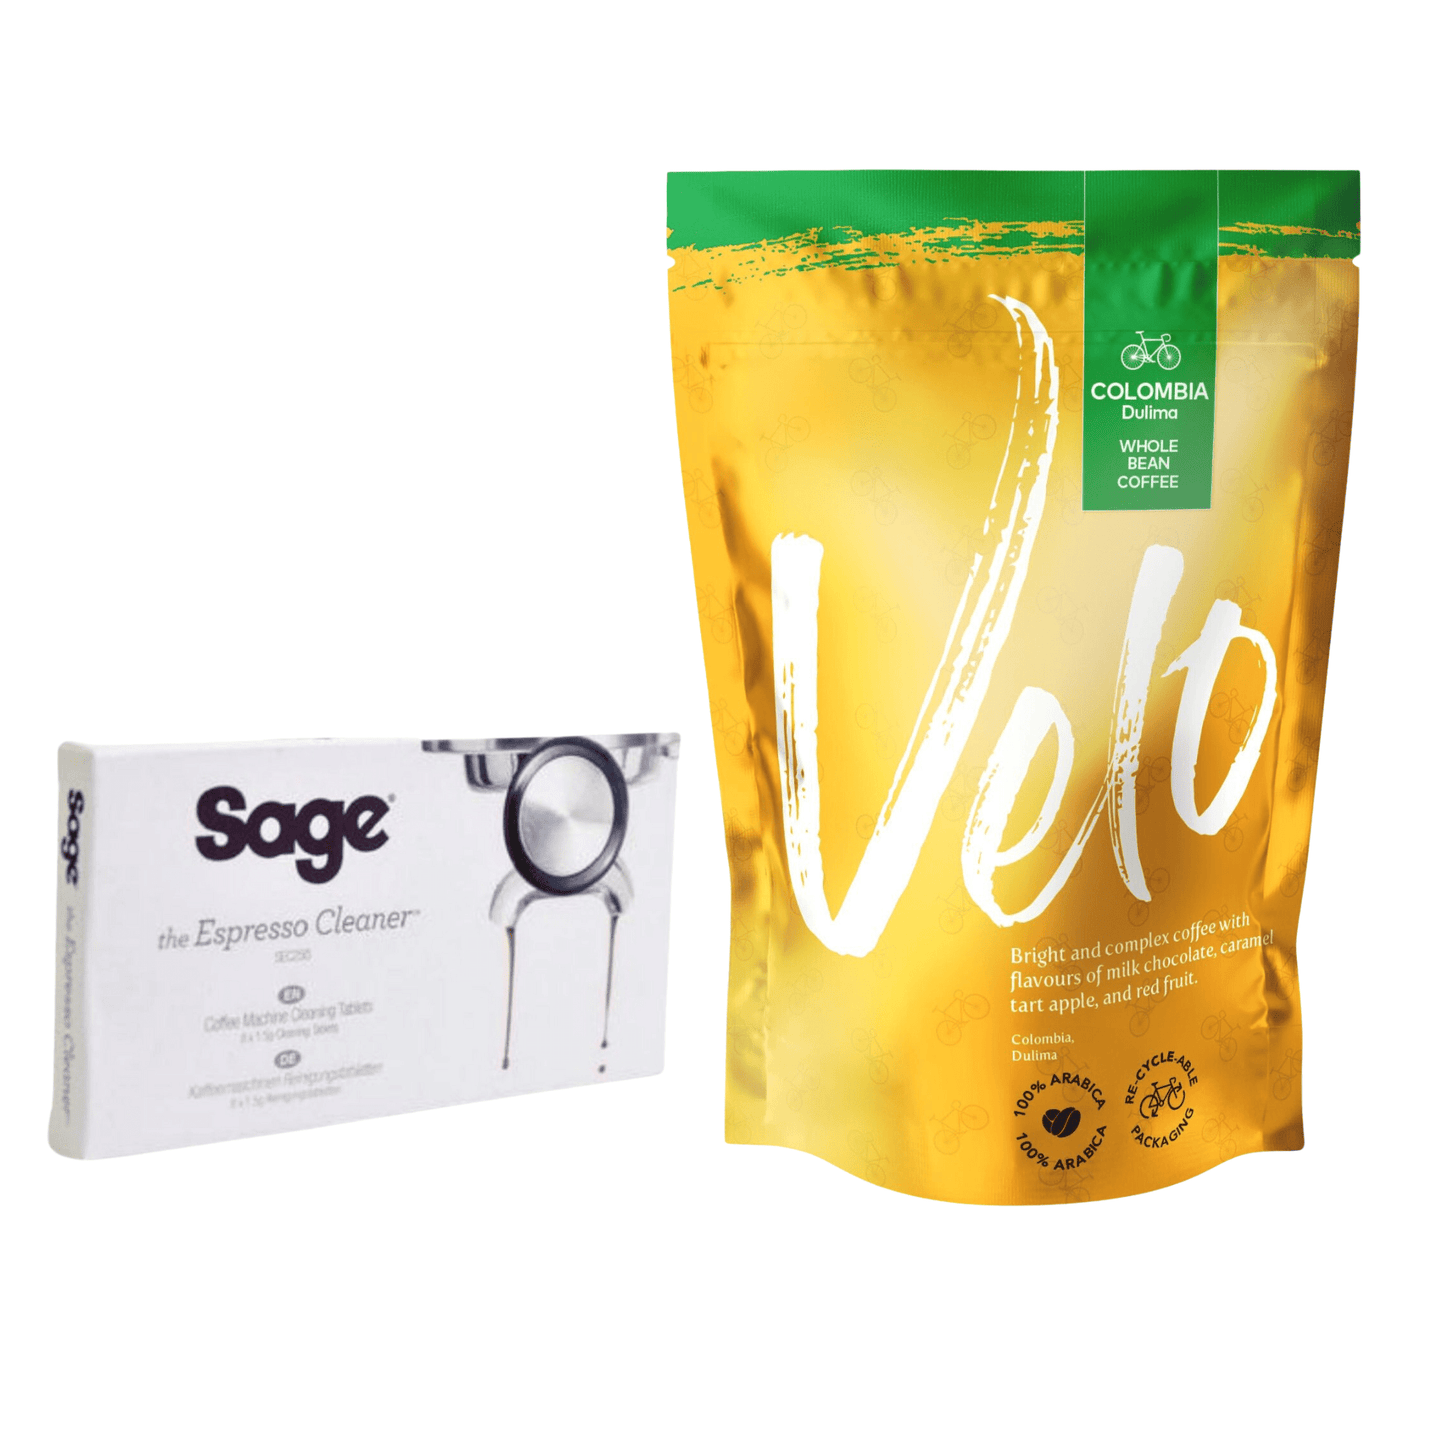 Sage Espresso Cleaning Tablets and Coffee Bundle - Velo Coffee Roasters